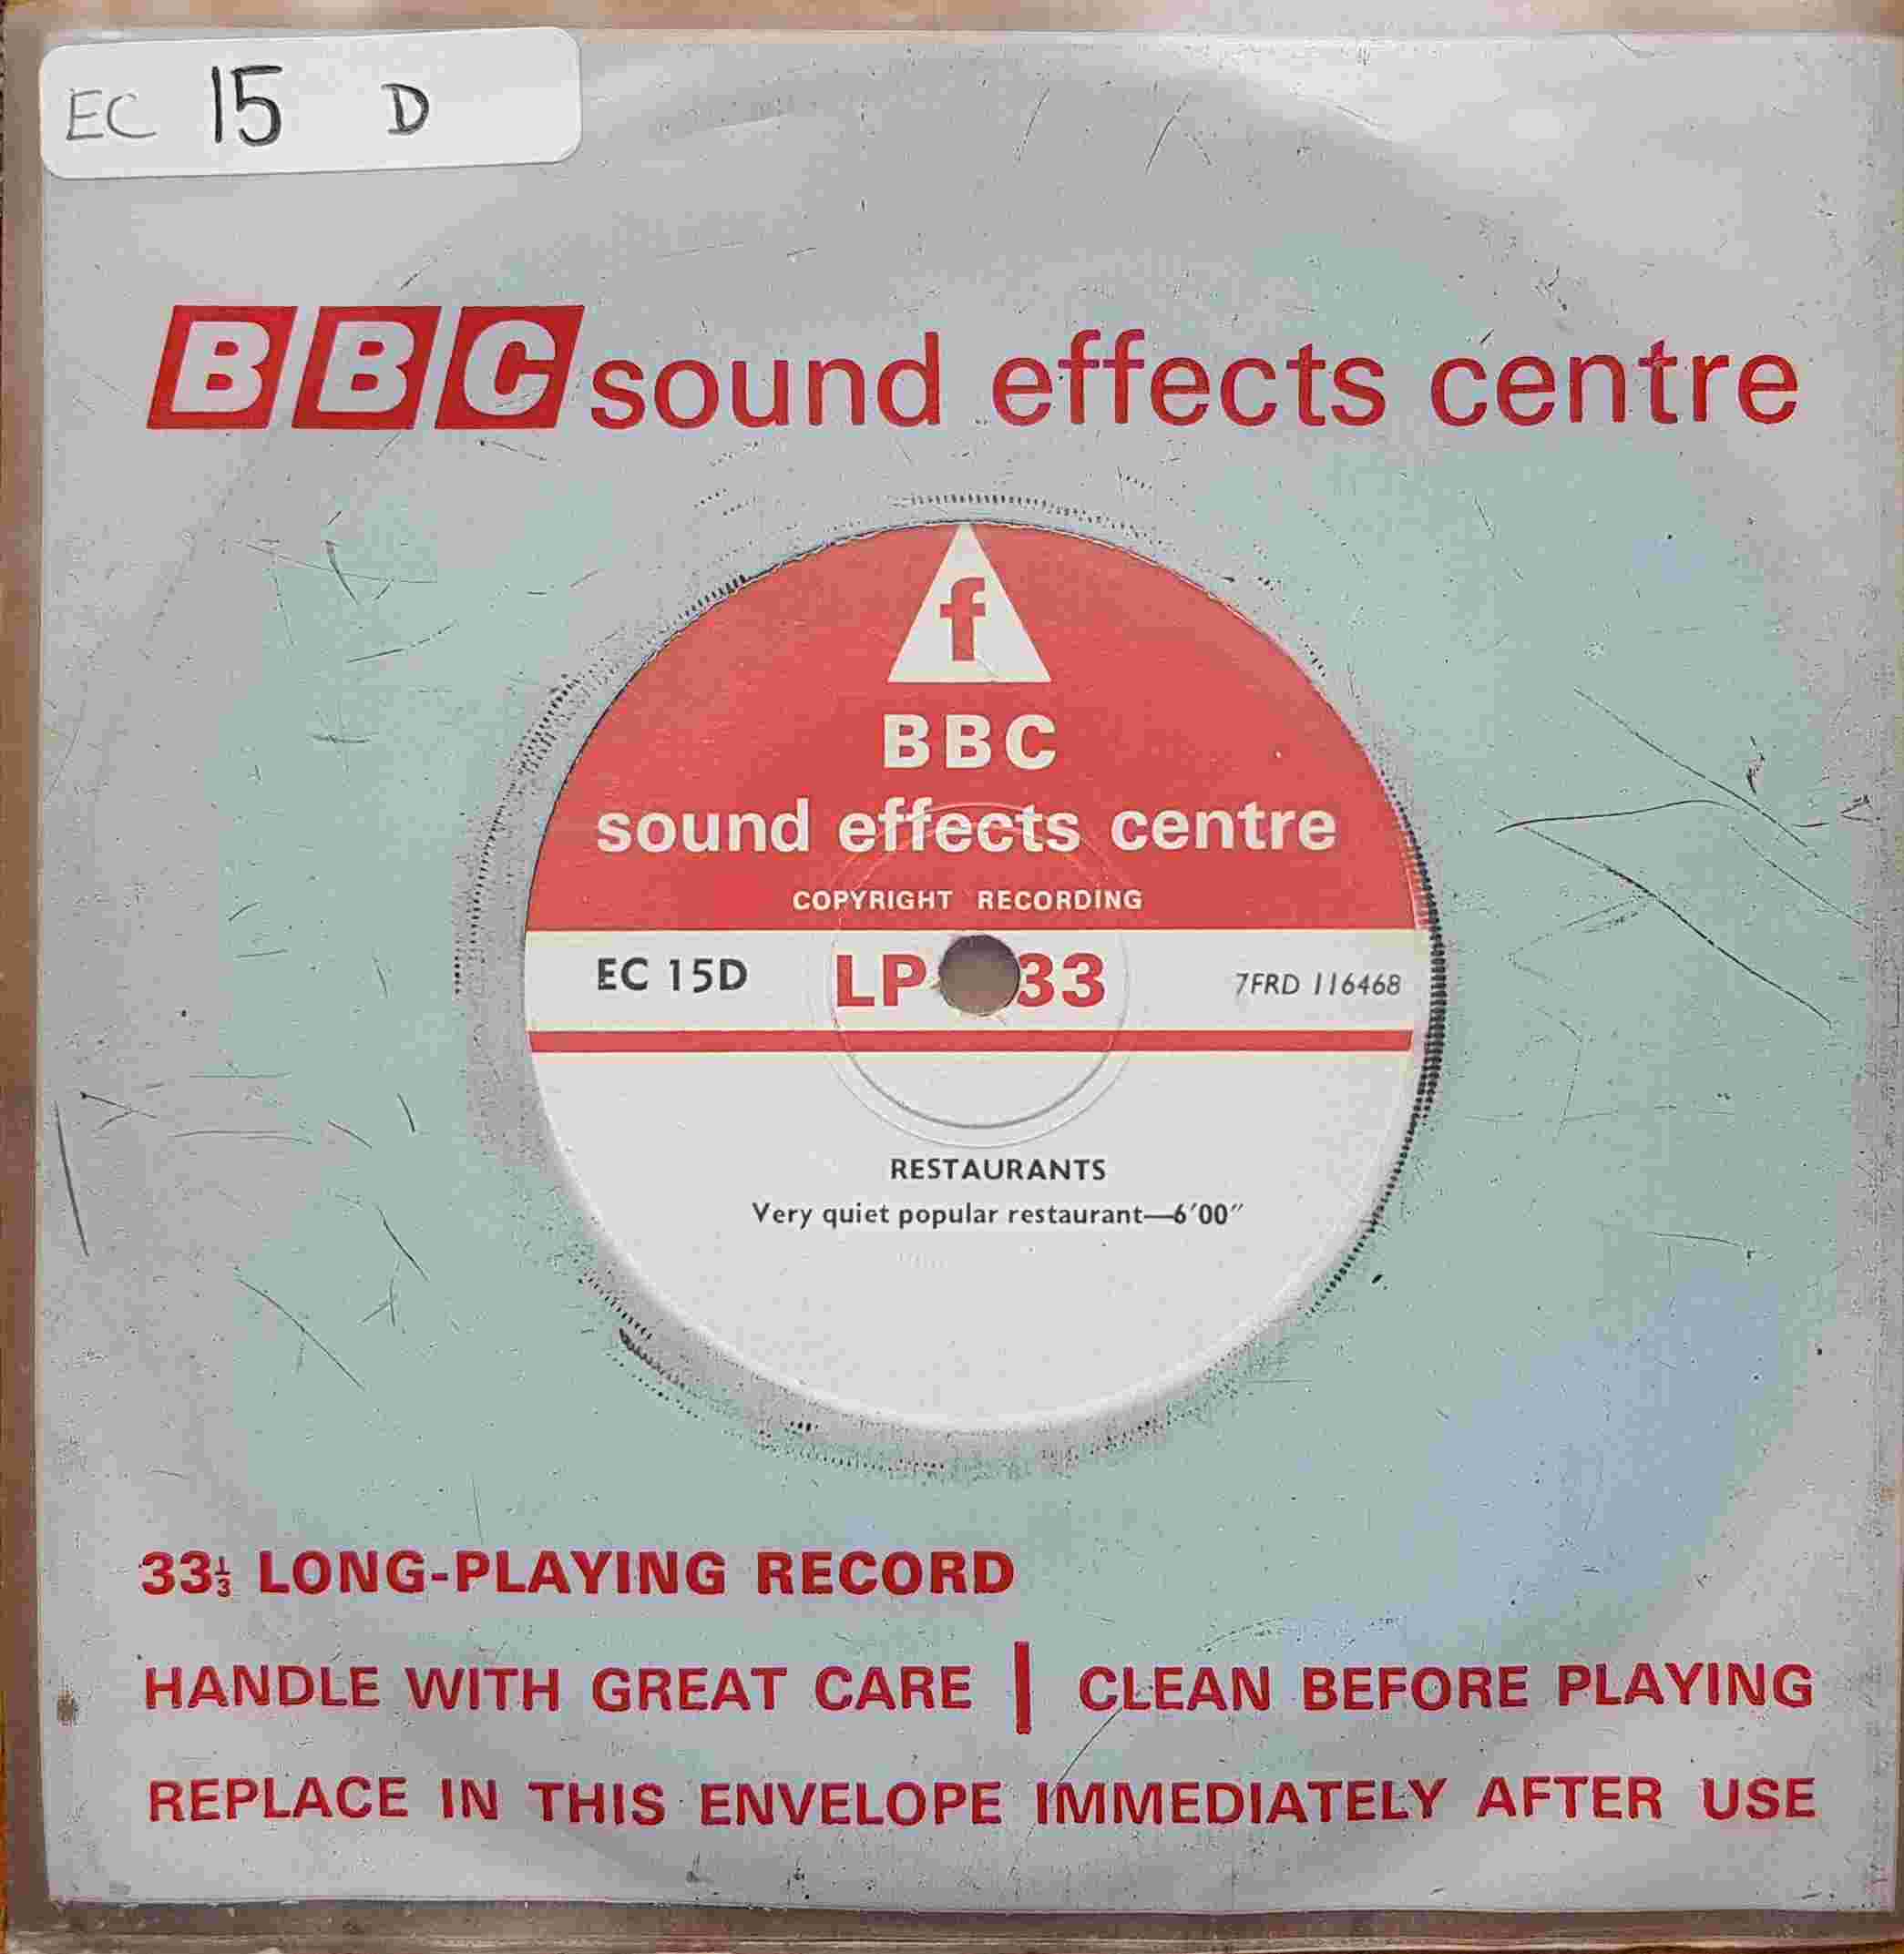 Picture of EC 15D Restaurants single by artist Not registered from the BBC records and Tapes library